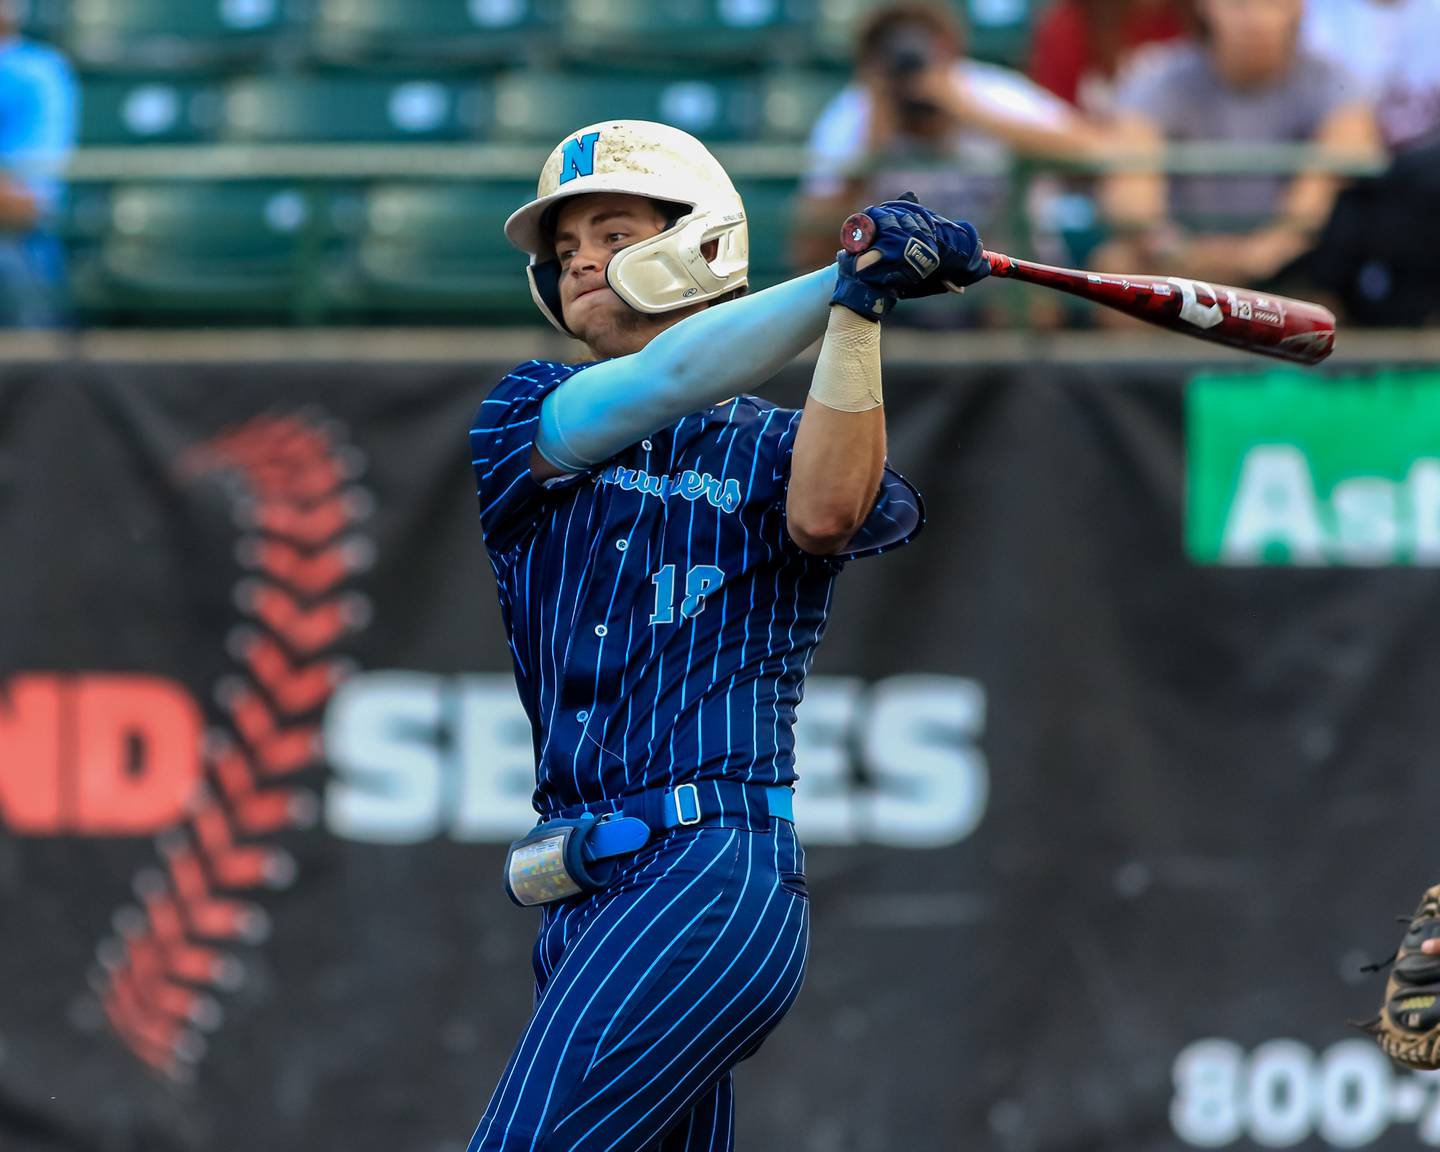 Nazareth's Lucas Smith (18) swings away during the Class 3A Crestwood Supersectional game between St. Ignatius at Nazareth.  June 6, 2022.